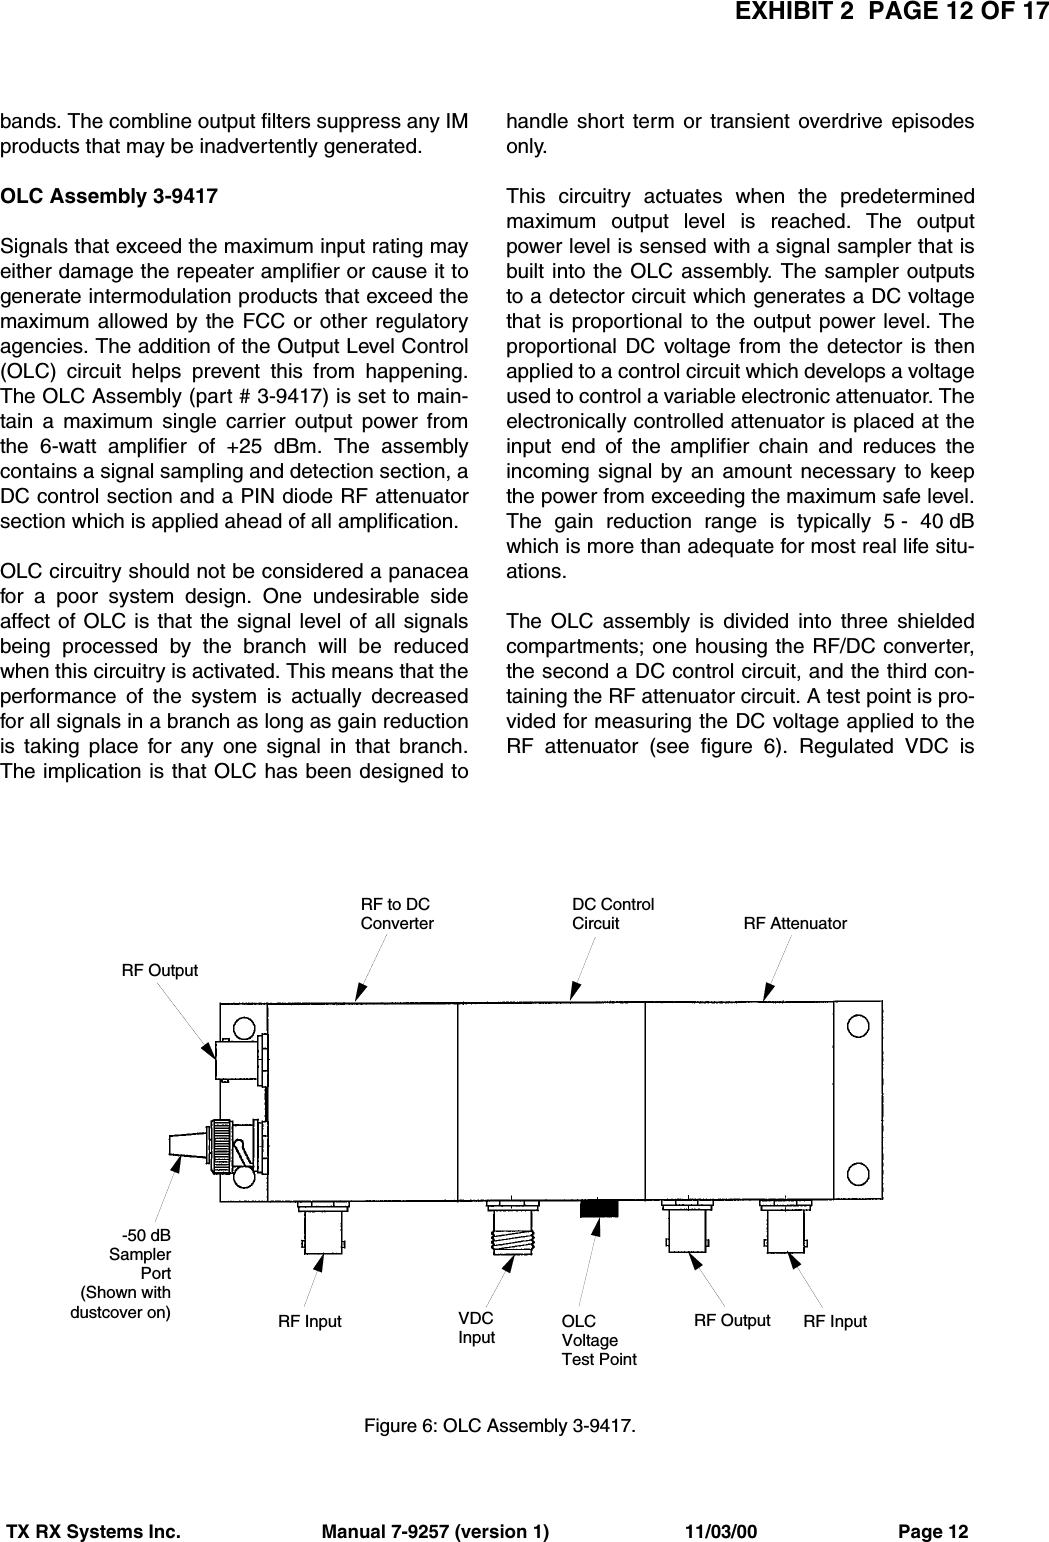 EXHIBIT 2  PAGE 12 OF 17TX RX Systems Inc.                           Manual 7-9257 (version 1)                          11/03/00                           Page 12bands. The combline output filters suppress any IMproducts that may be inadvertently generated.OLC Assembly 3-9417Signals that exceed the maximum input rating mayeither damage the repeater amplifier or cause it togenerate intermodulation products that exceed themaximum allowed by the FCC or other regulatoryagencies. The addition of the Output Level Control(OLC) circuit helps prevent this from happening.The OLC Assembly (part # 3-9417) is set to main-tain a maximum single carrier output power fromthe 6-watt amplifier of +25 dBm. The assemblycontains a signal sampling and detection section, aDC control section and a PIN diode RF attenuatorsection which is applied ahead of all amplification.OLC circuitry should not be considered a panaceafor a poor system design. One undesirable sideaffect of OLC is that the signal level of all signalsbeing processed by the branch will be reducedwhen this circuitry is activated. This means that theperformance of the system is actually decreasedfor all signals in a branch as long as gain reductionis taking place for any one signal in that branch.The implication is that OLC has been designed tohandle short term or transient overdrive episodesonly.This circuitry actuates when the predeterminedmaximum output level is reached. The outputpower level is sensed with a signal sampler that isbuilt into the OLC assembly. The sampler outputsto a detector circuit which generates a DC voltagethat is proportional to the output power level. Theproportional DC voltage from the detector is thenapplied to a control circuit which develops a voltageused to control a variable electronic attenuator. Theelectronically controlled attenuator is placed at theinput end of the amplifier chain and reduces theincoming signal by an amount necessary to keepthe power from exceeding the maximum safe level.The gain reduction range is typically 5 - 40 dBwhich is more than adequate for most real life situ-ations. The OLC assembly is divided into three shieldedcompartments; one housing the RF/DC converter,the second a DC control circuit, and the third con-taining the RF attenuator circuit. A test point is pro-vided for measuring the DC voltage applied to theRF attenuator (see figure 6). Regulated VDC isRF to DCConverterDC ControlCircuit RF AttenuatorRF InputRF OutputOLCVoltageTest PointVDCInputRF Input-50 dBSamplerPort(Shown withdustcover on)RF OutputFigure 6: OLC Assembly 3-9417.